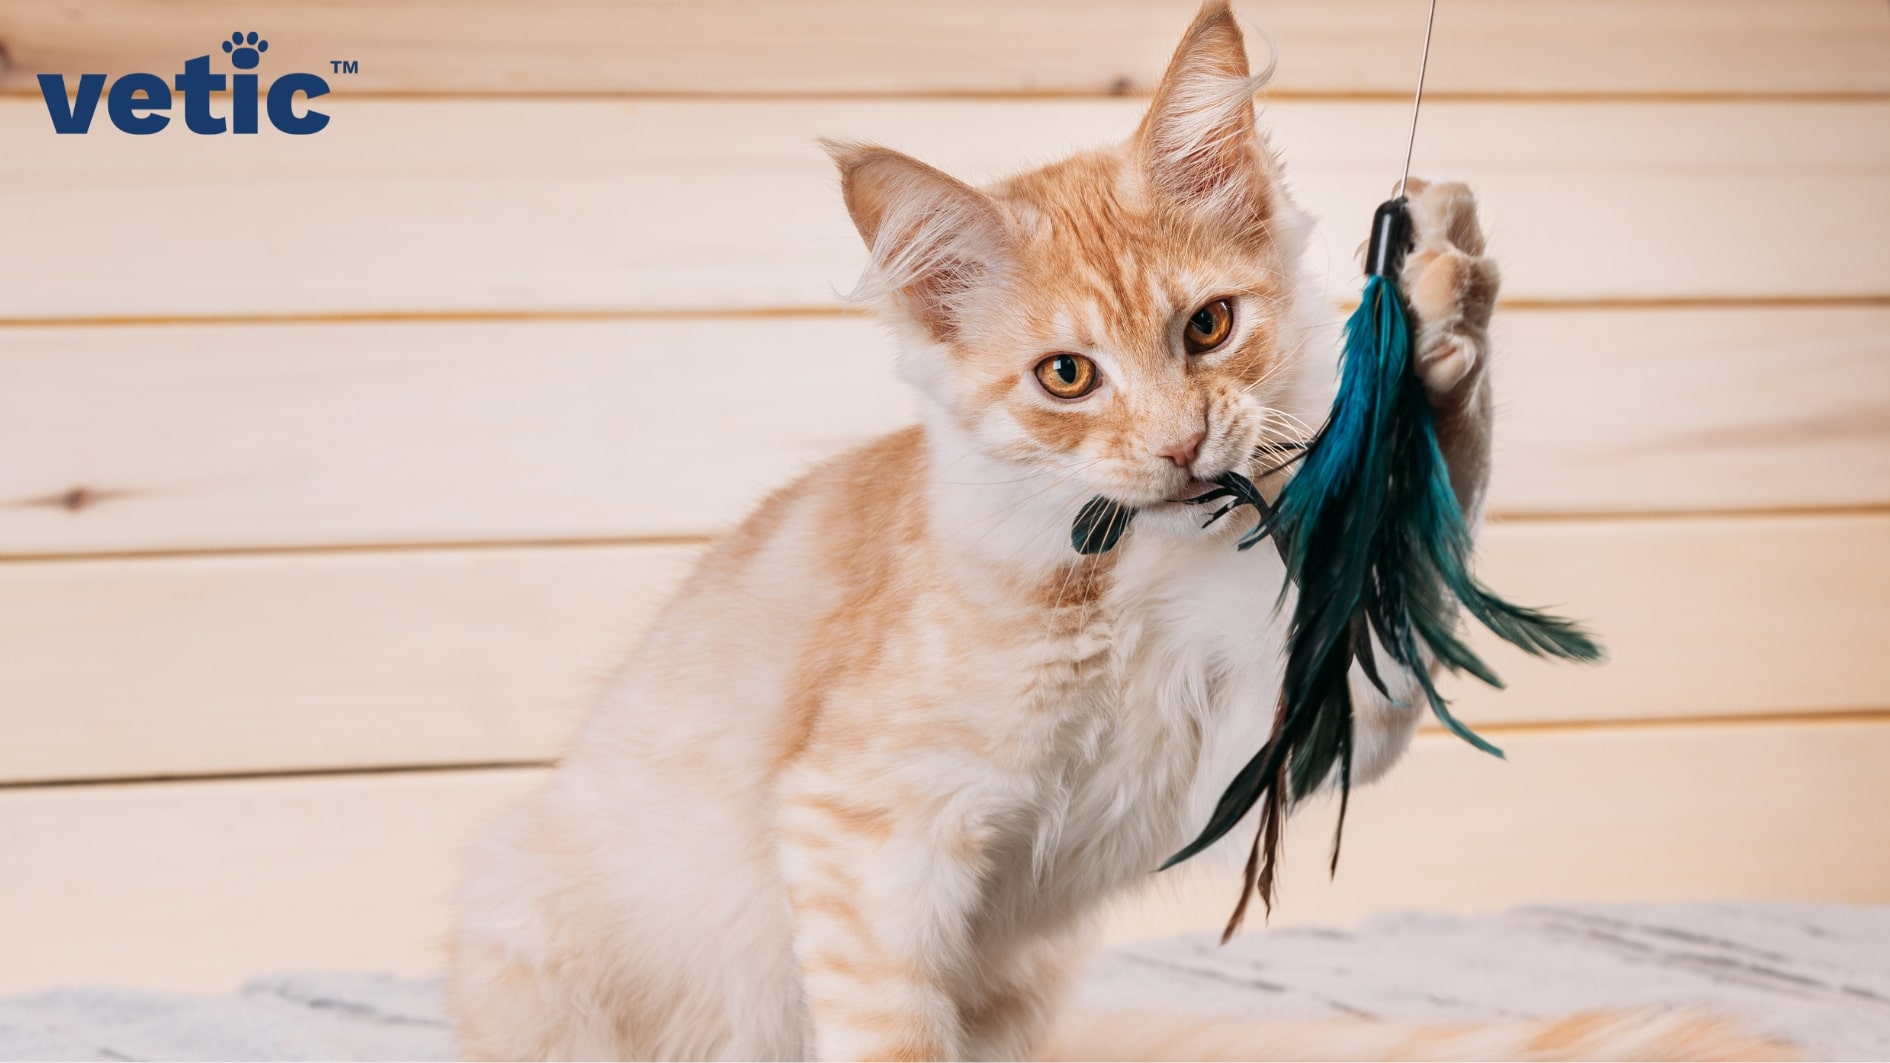 Medium-sized light orange and white cat with bright orange eyes playing with a feather interactive toy. the feathers are mostly cobalt blue and peacock blue. cats need interactive toys for mental stimulation and new owners must stock up on good-quality, non-toxic toys like these to play with their cats